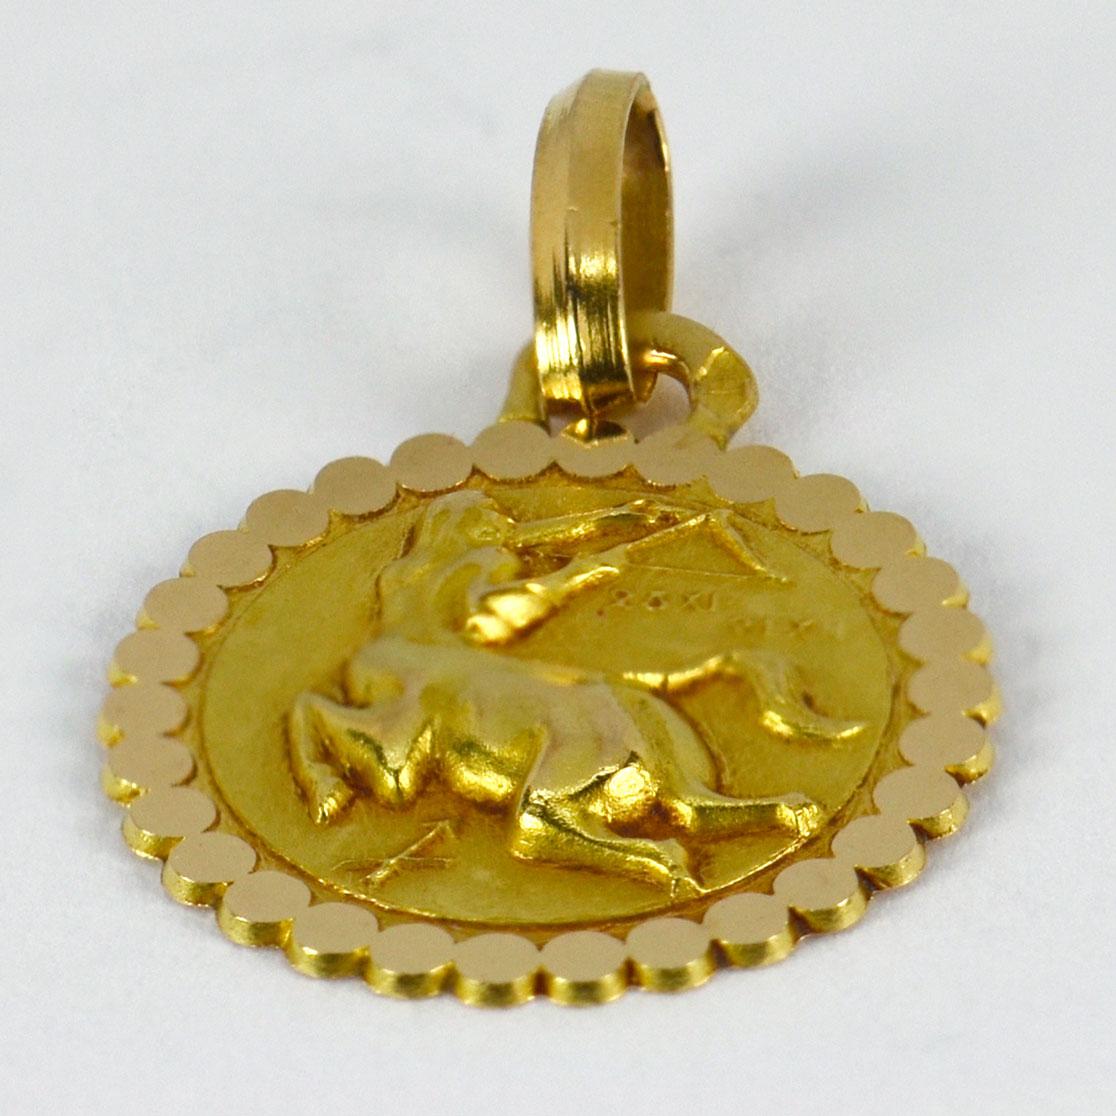 An 18 karat (18K) yellow gold charm pendant designed as the zodiac symbol for Sagittarius, depicting a centaur with bow and arrow, the astrological symbol for Sagittarius and the dates 23 November - 21 December. Stamped with the eagle’s head for